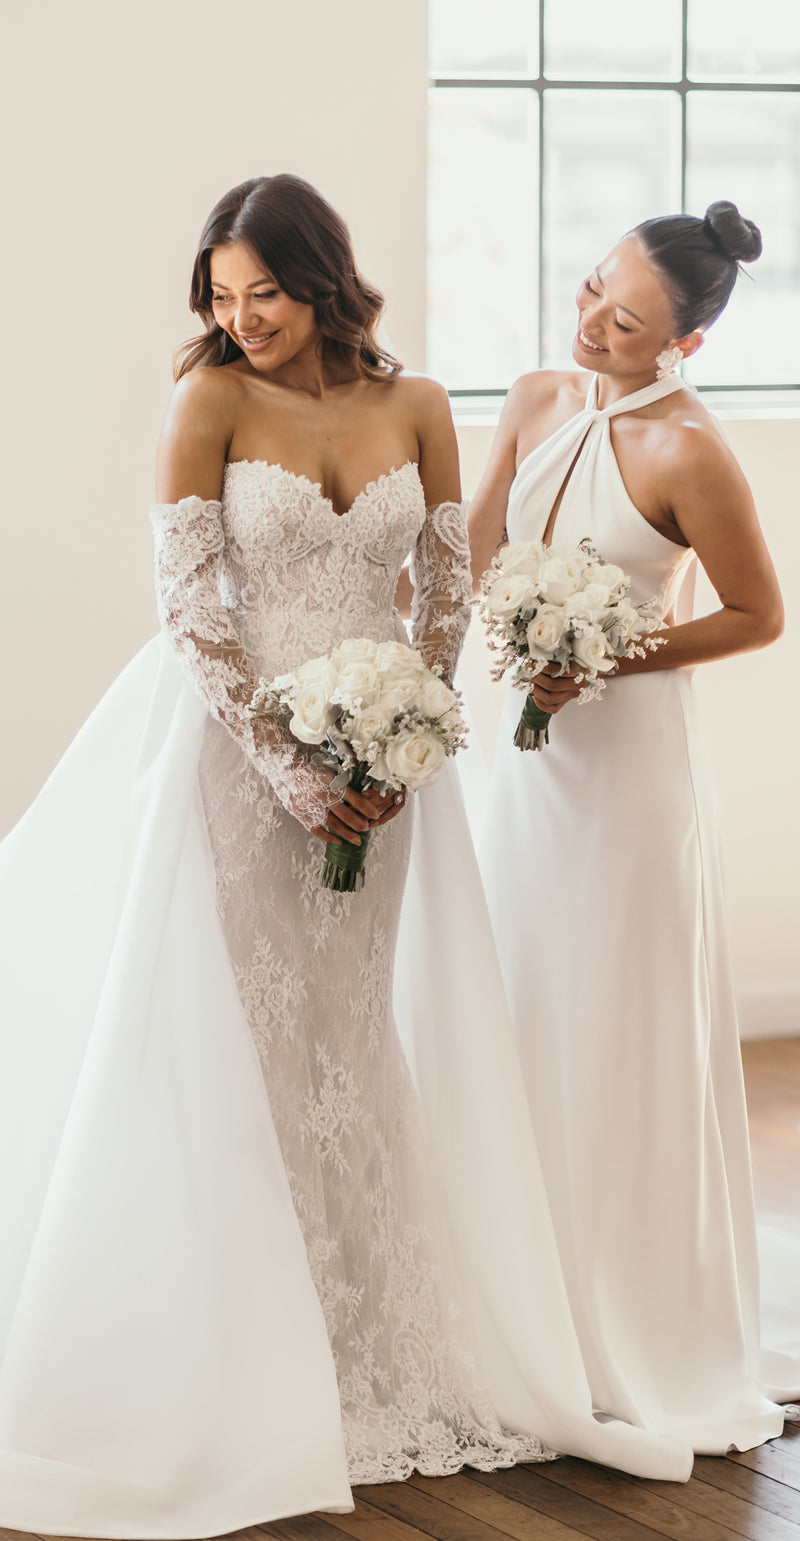 bride with bridesmaid in their wedding attire holding flowers